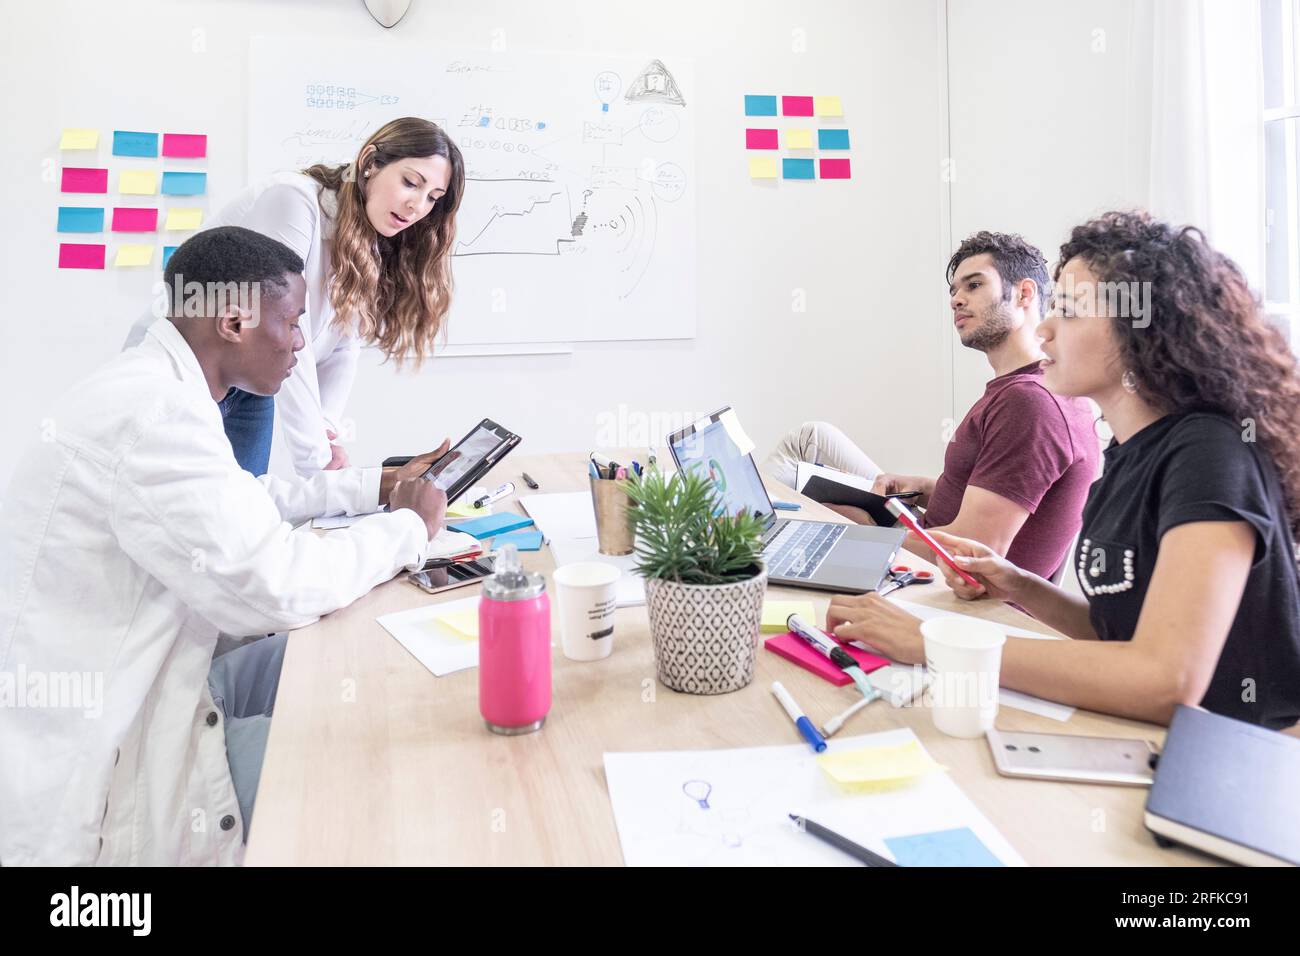 Happy people during a meeting presentation Stock Photo